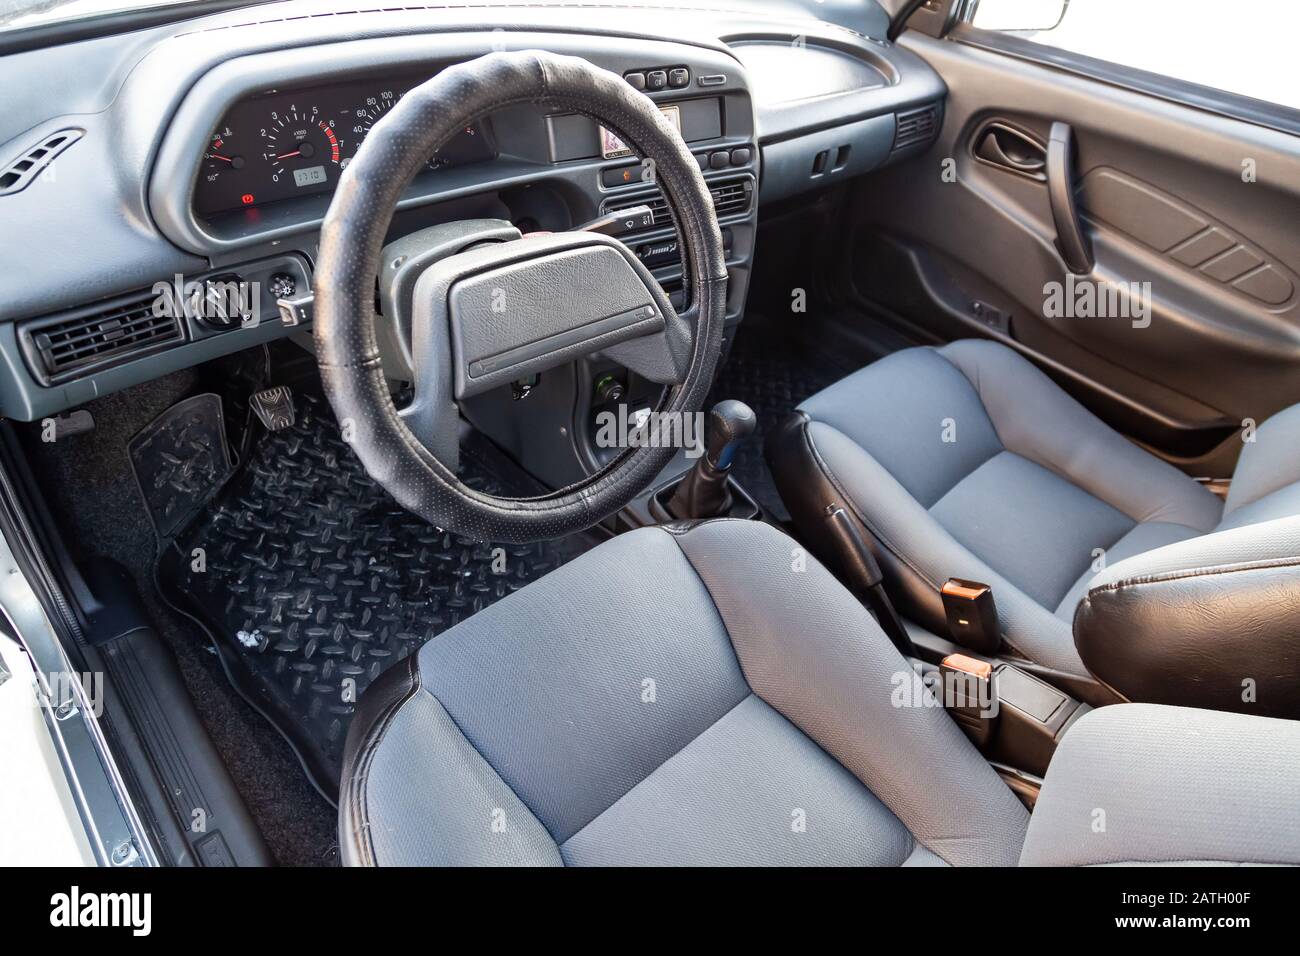 Novosibirsk, Russia - 02.01.2020: The interior of the car lada 2114 samara with a view of the steering wheel, dashboard, seats and multimedia system w Stock Photo